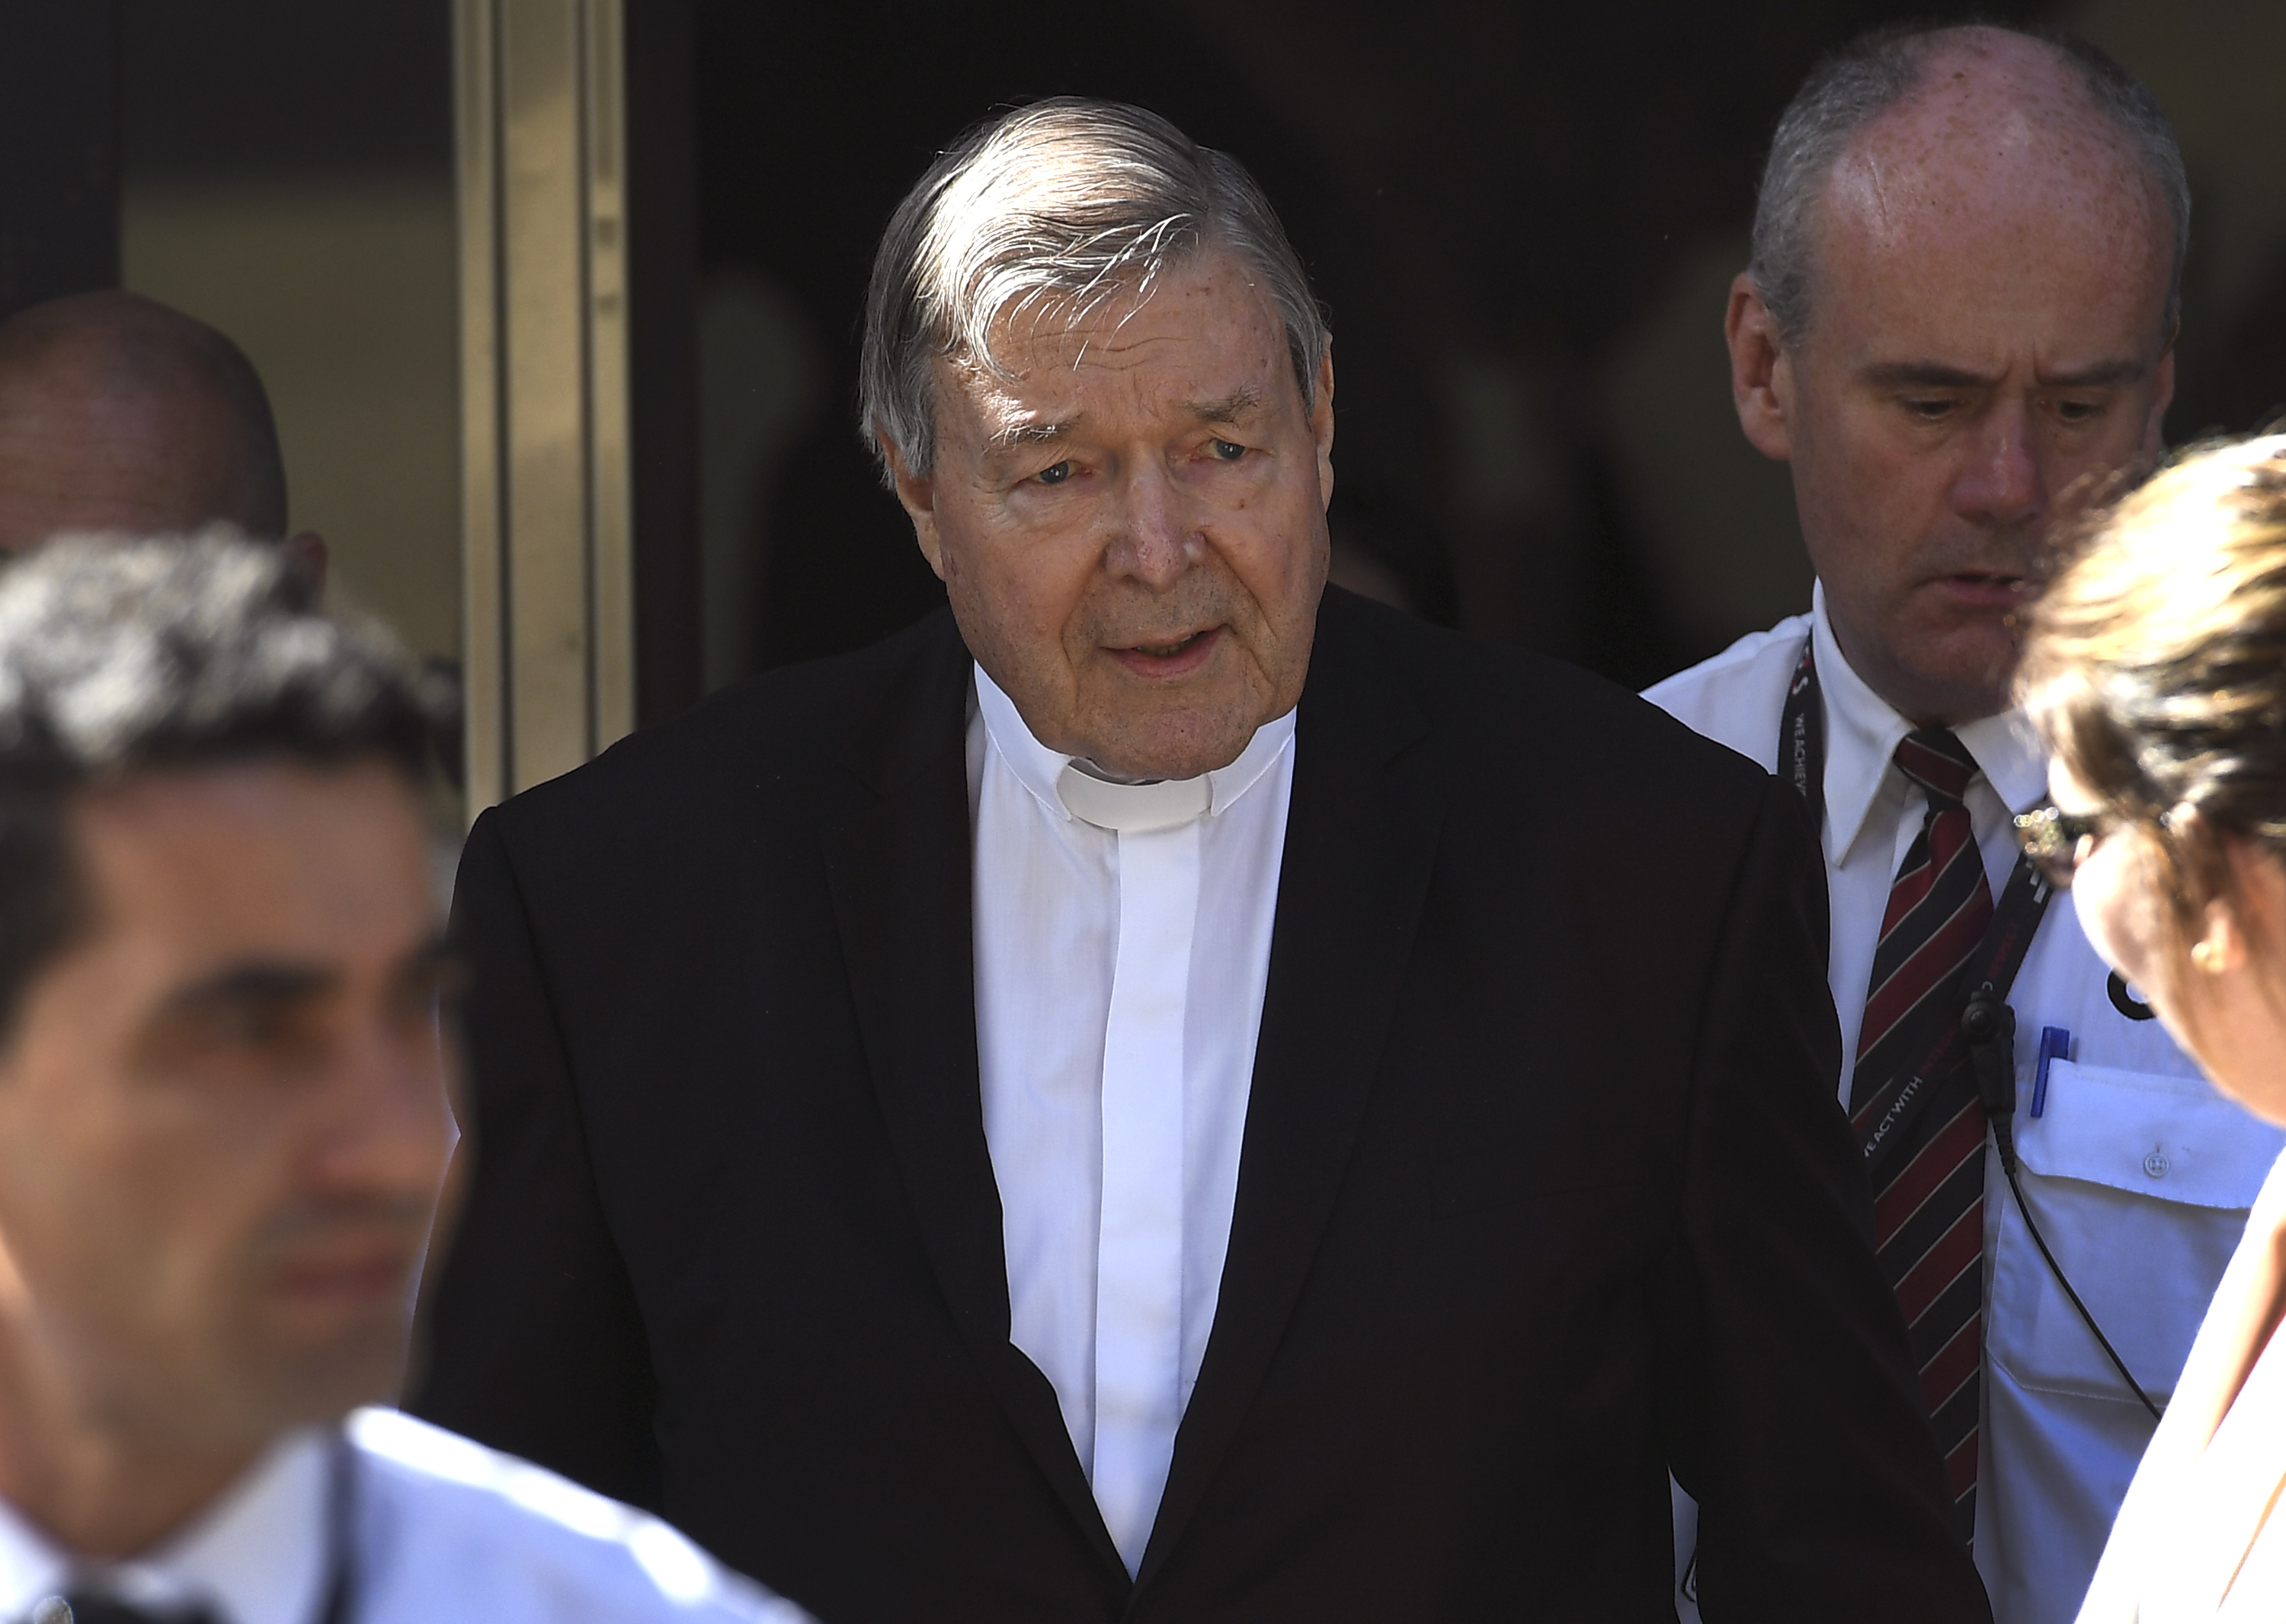 Cardinal George Pell walks to a car in Melbourne on December 11, 2018. - Pell is facing prosecution for historical child sexual offences. (WILLIAM WEST/AFP/Getty Images)